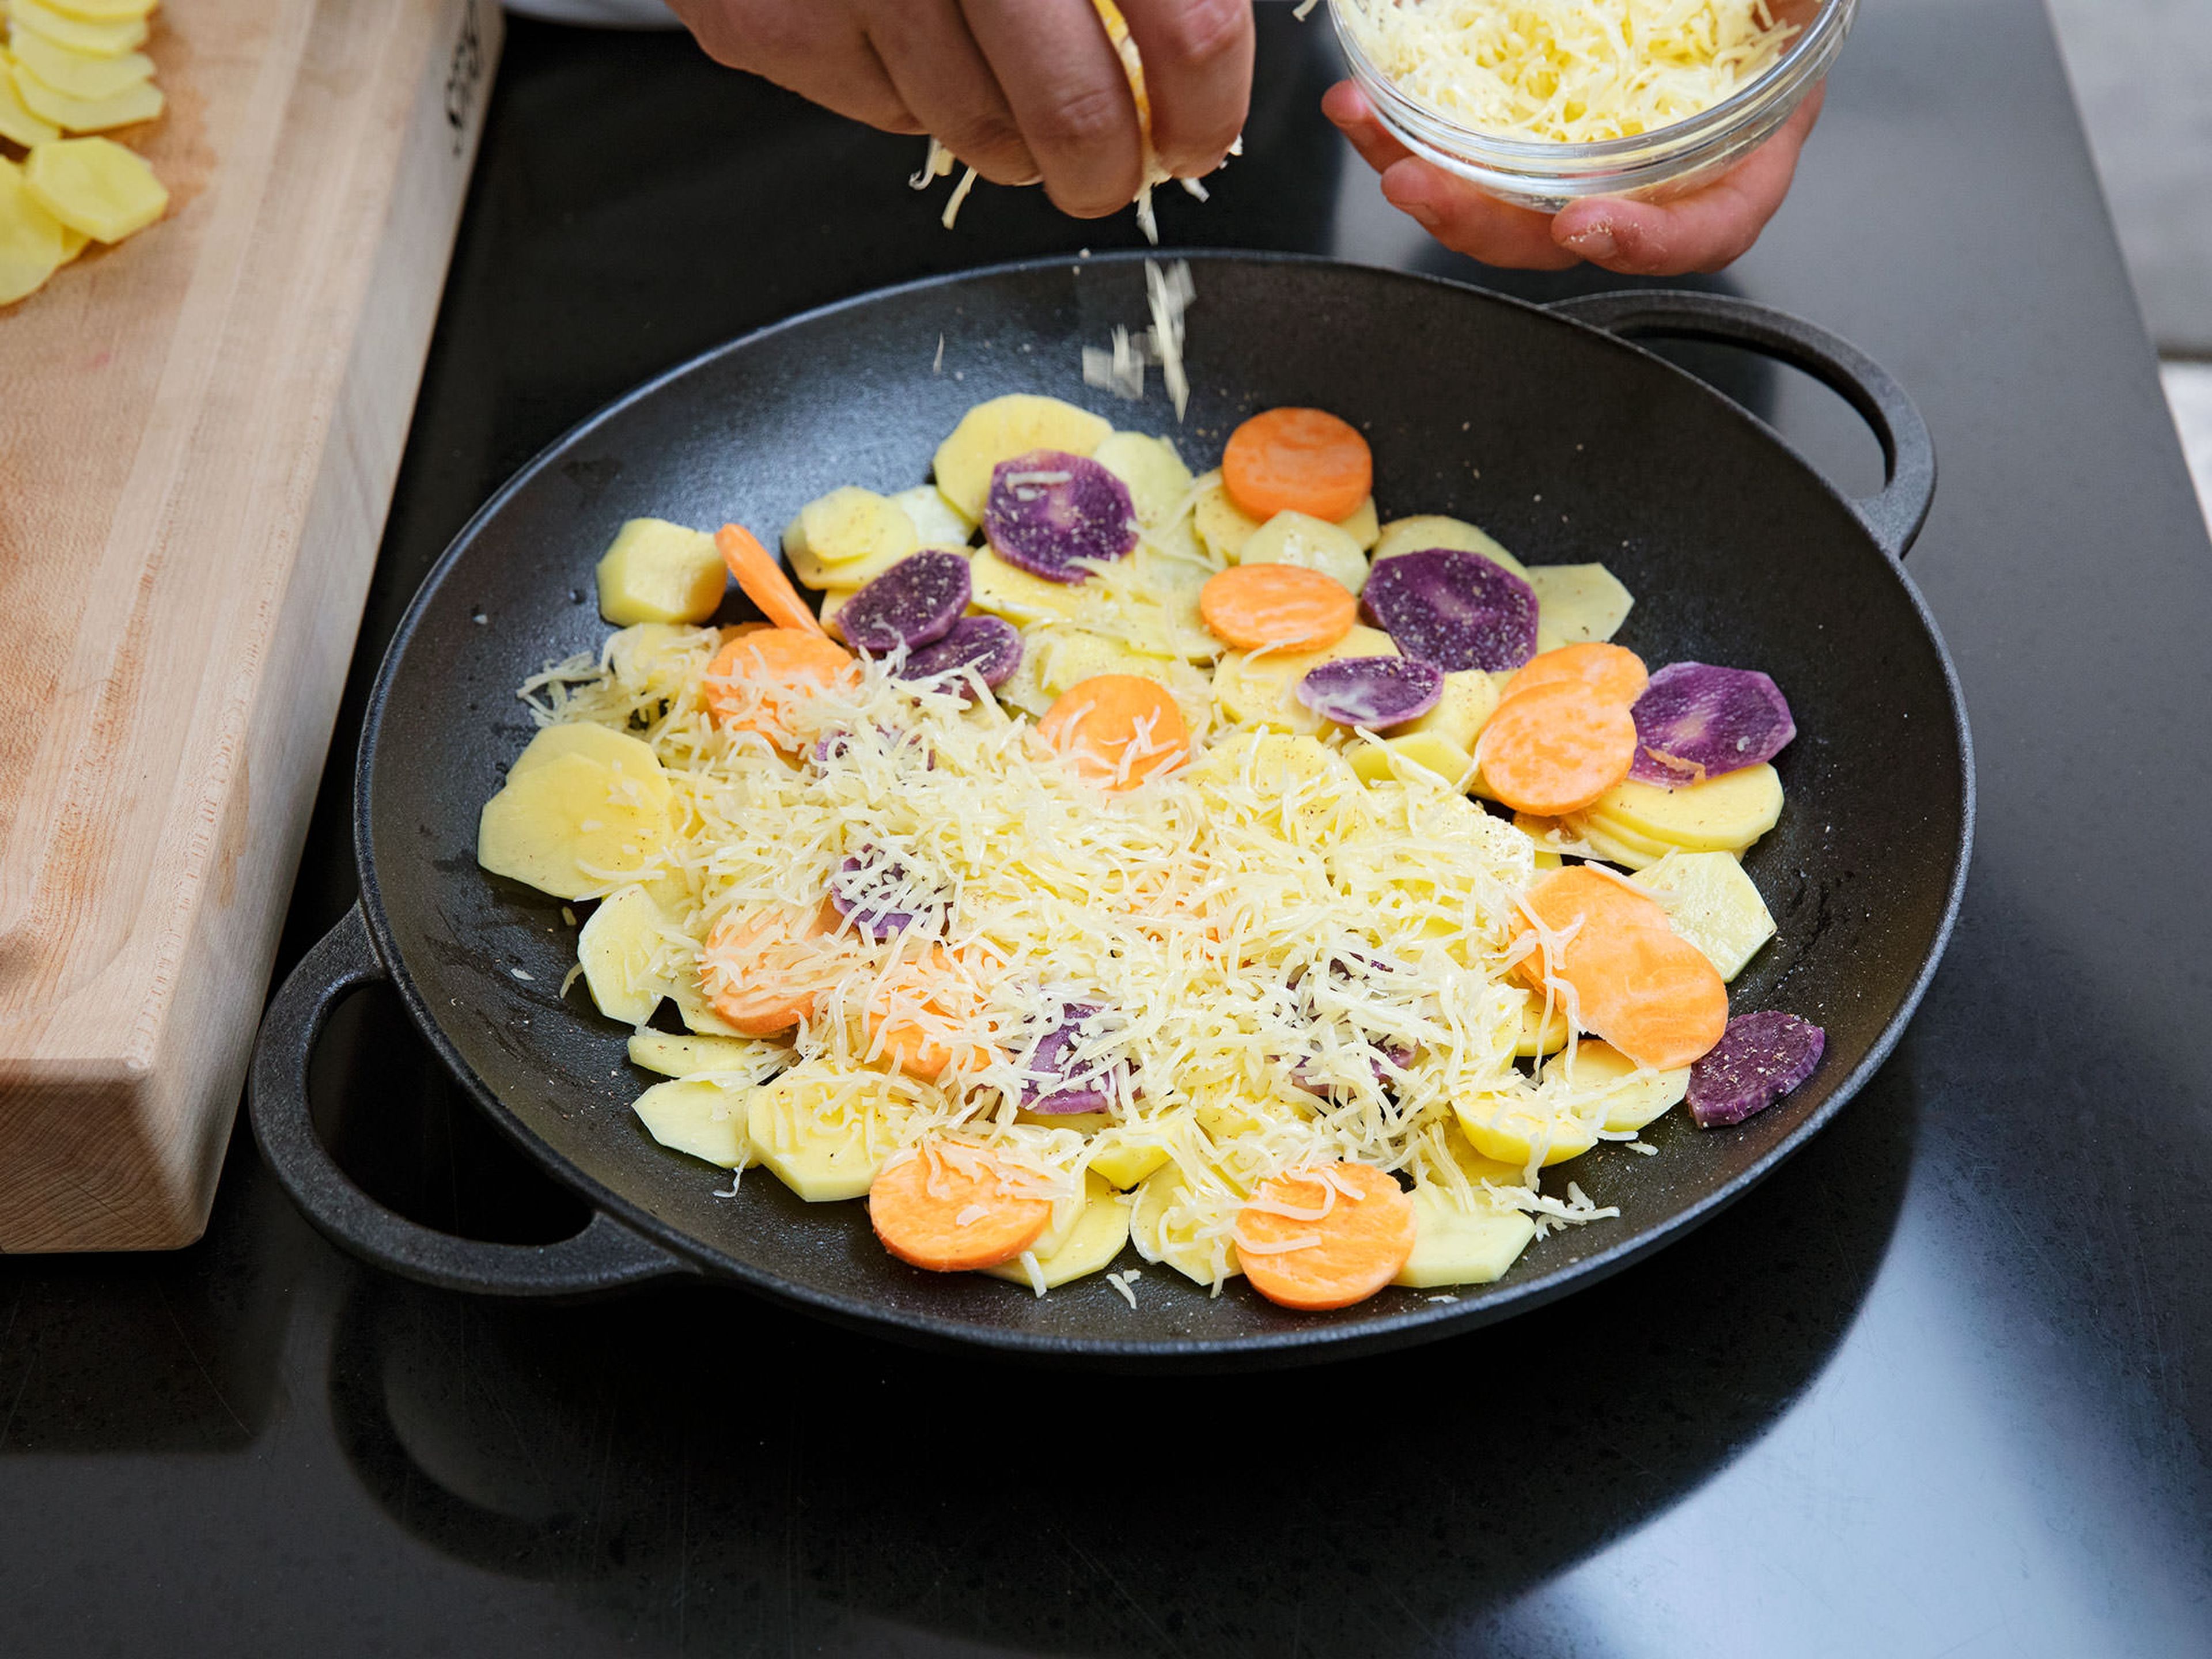 Evenly layer half of the potatoes a microwave-safe baking dish. Season with salt and pepper. Sprinkle with three quarters of the shredded Emmentaler cheese. Then, layer the remaining potatoes, alternating yellow, purple, and sweet potatoes. Sprinkle remaining cheese on top.